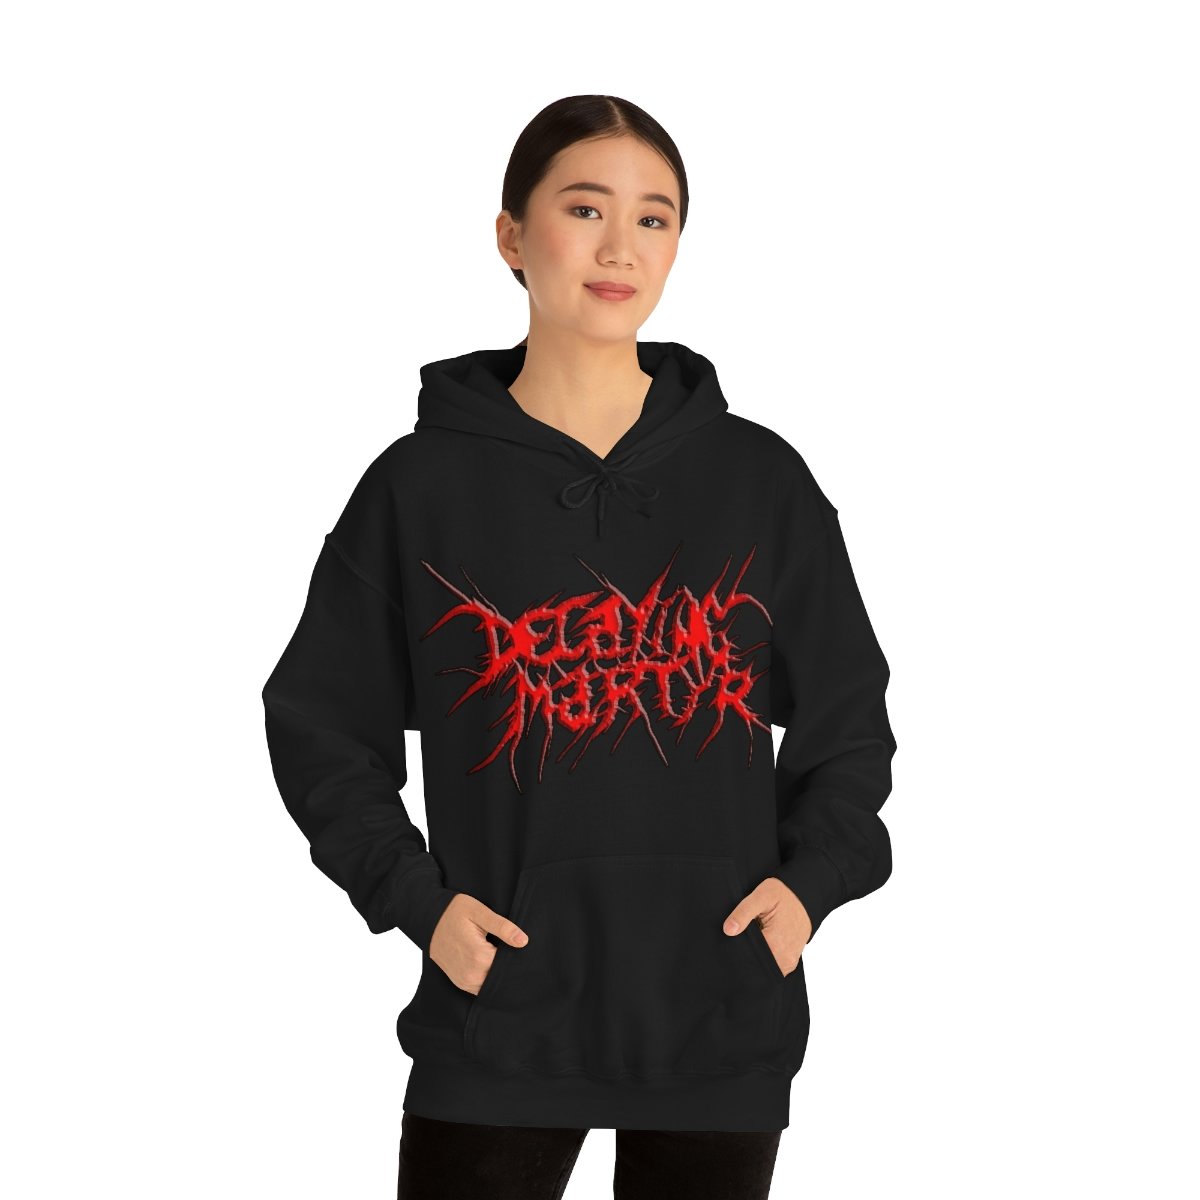 Decaying Martyr 3D Logo (Red) Pullover Hooded Sweatshirt